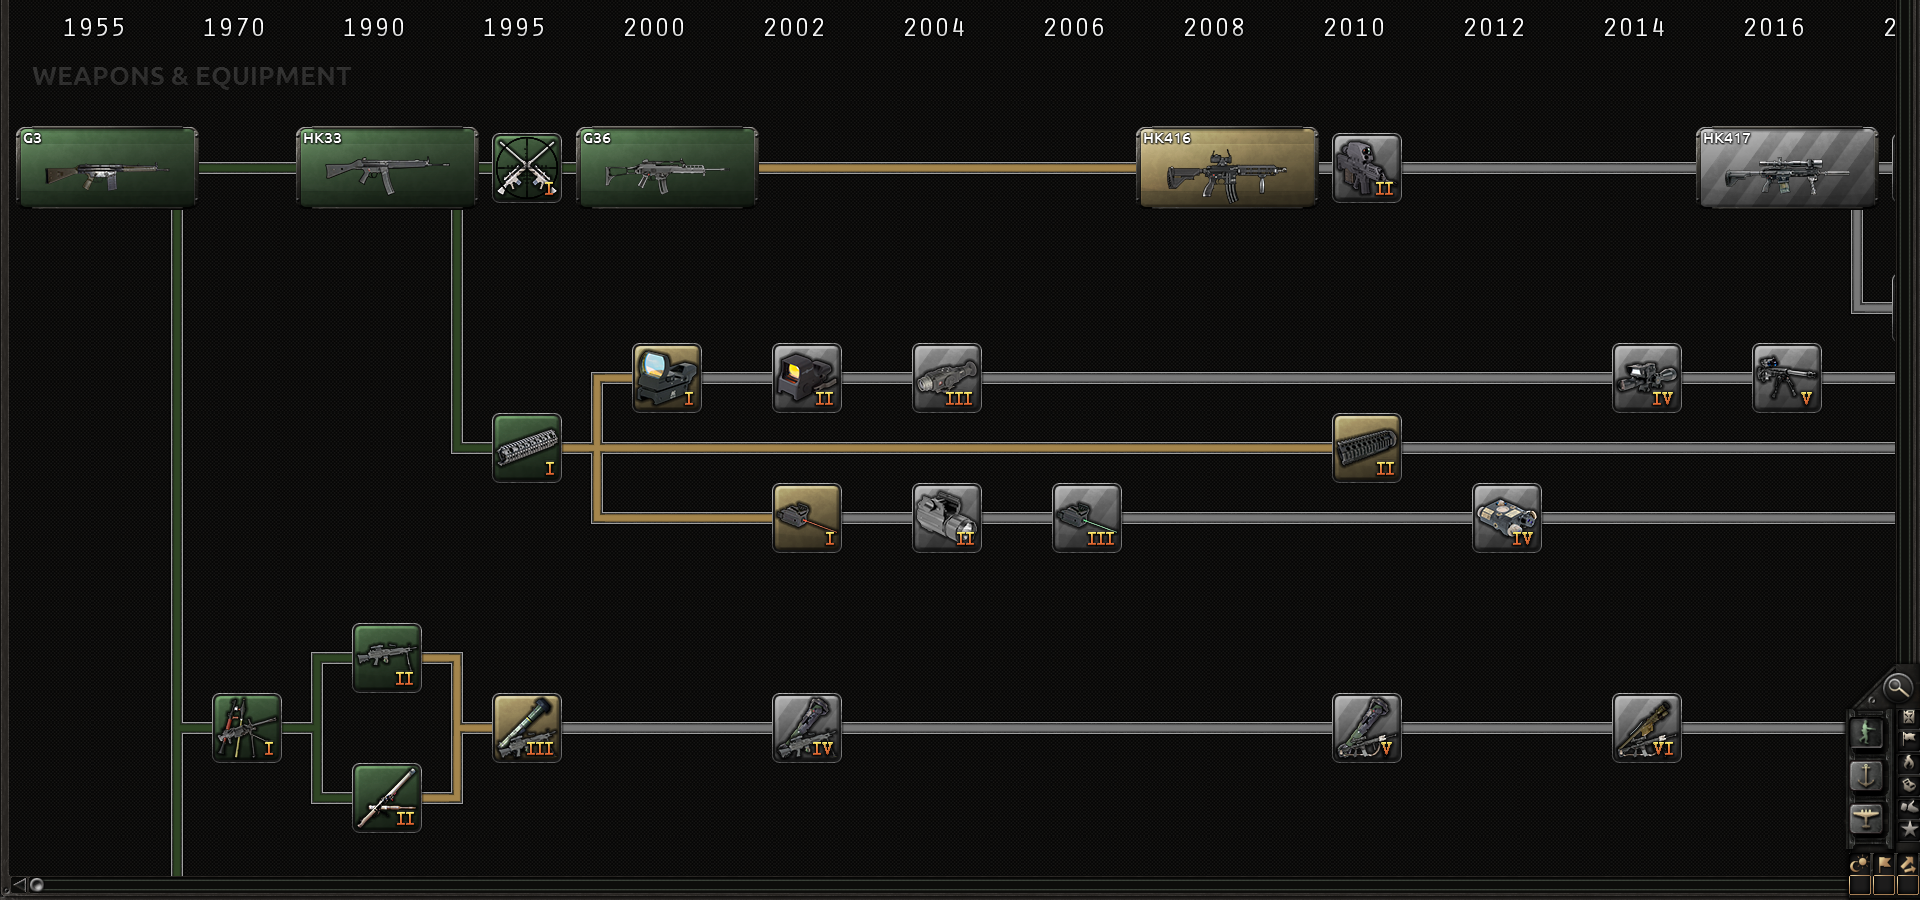 Infantry Tech Tree image - Millennium Dawn: Modern Day Mod for Hearts of Iron IV - Mod DB